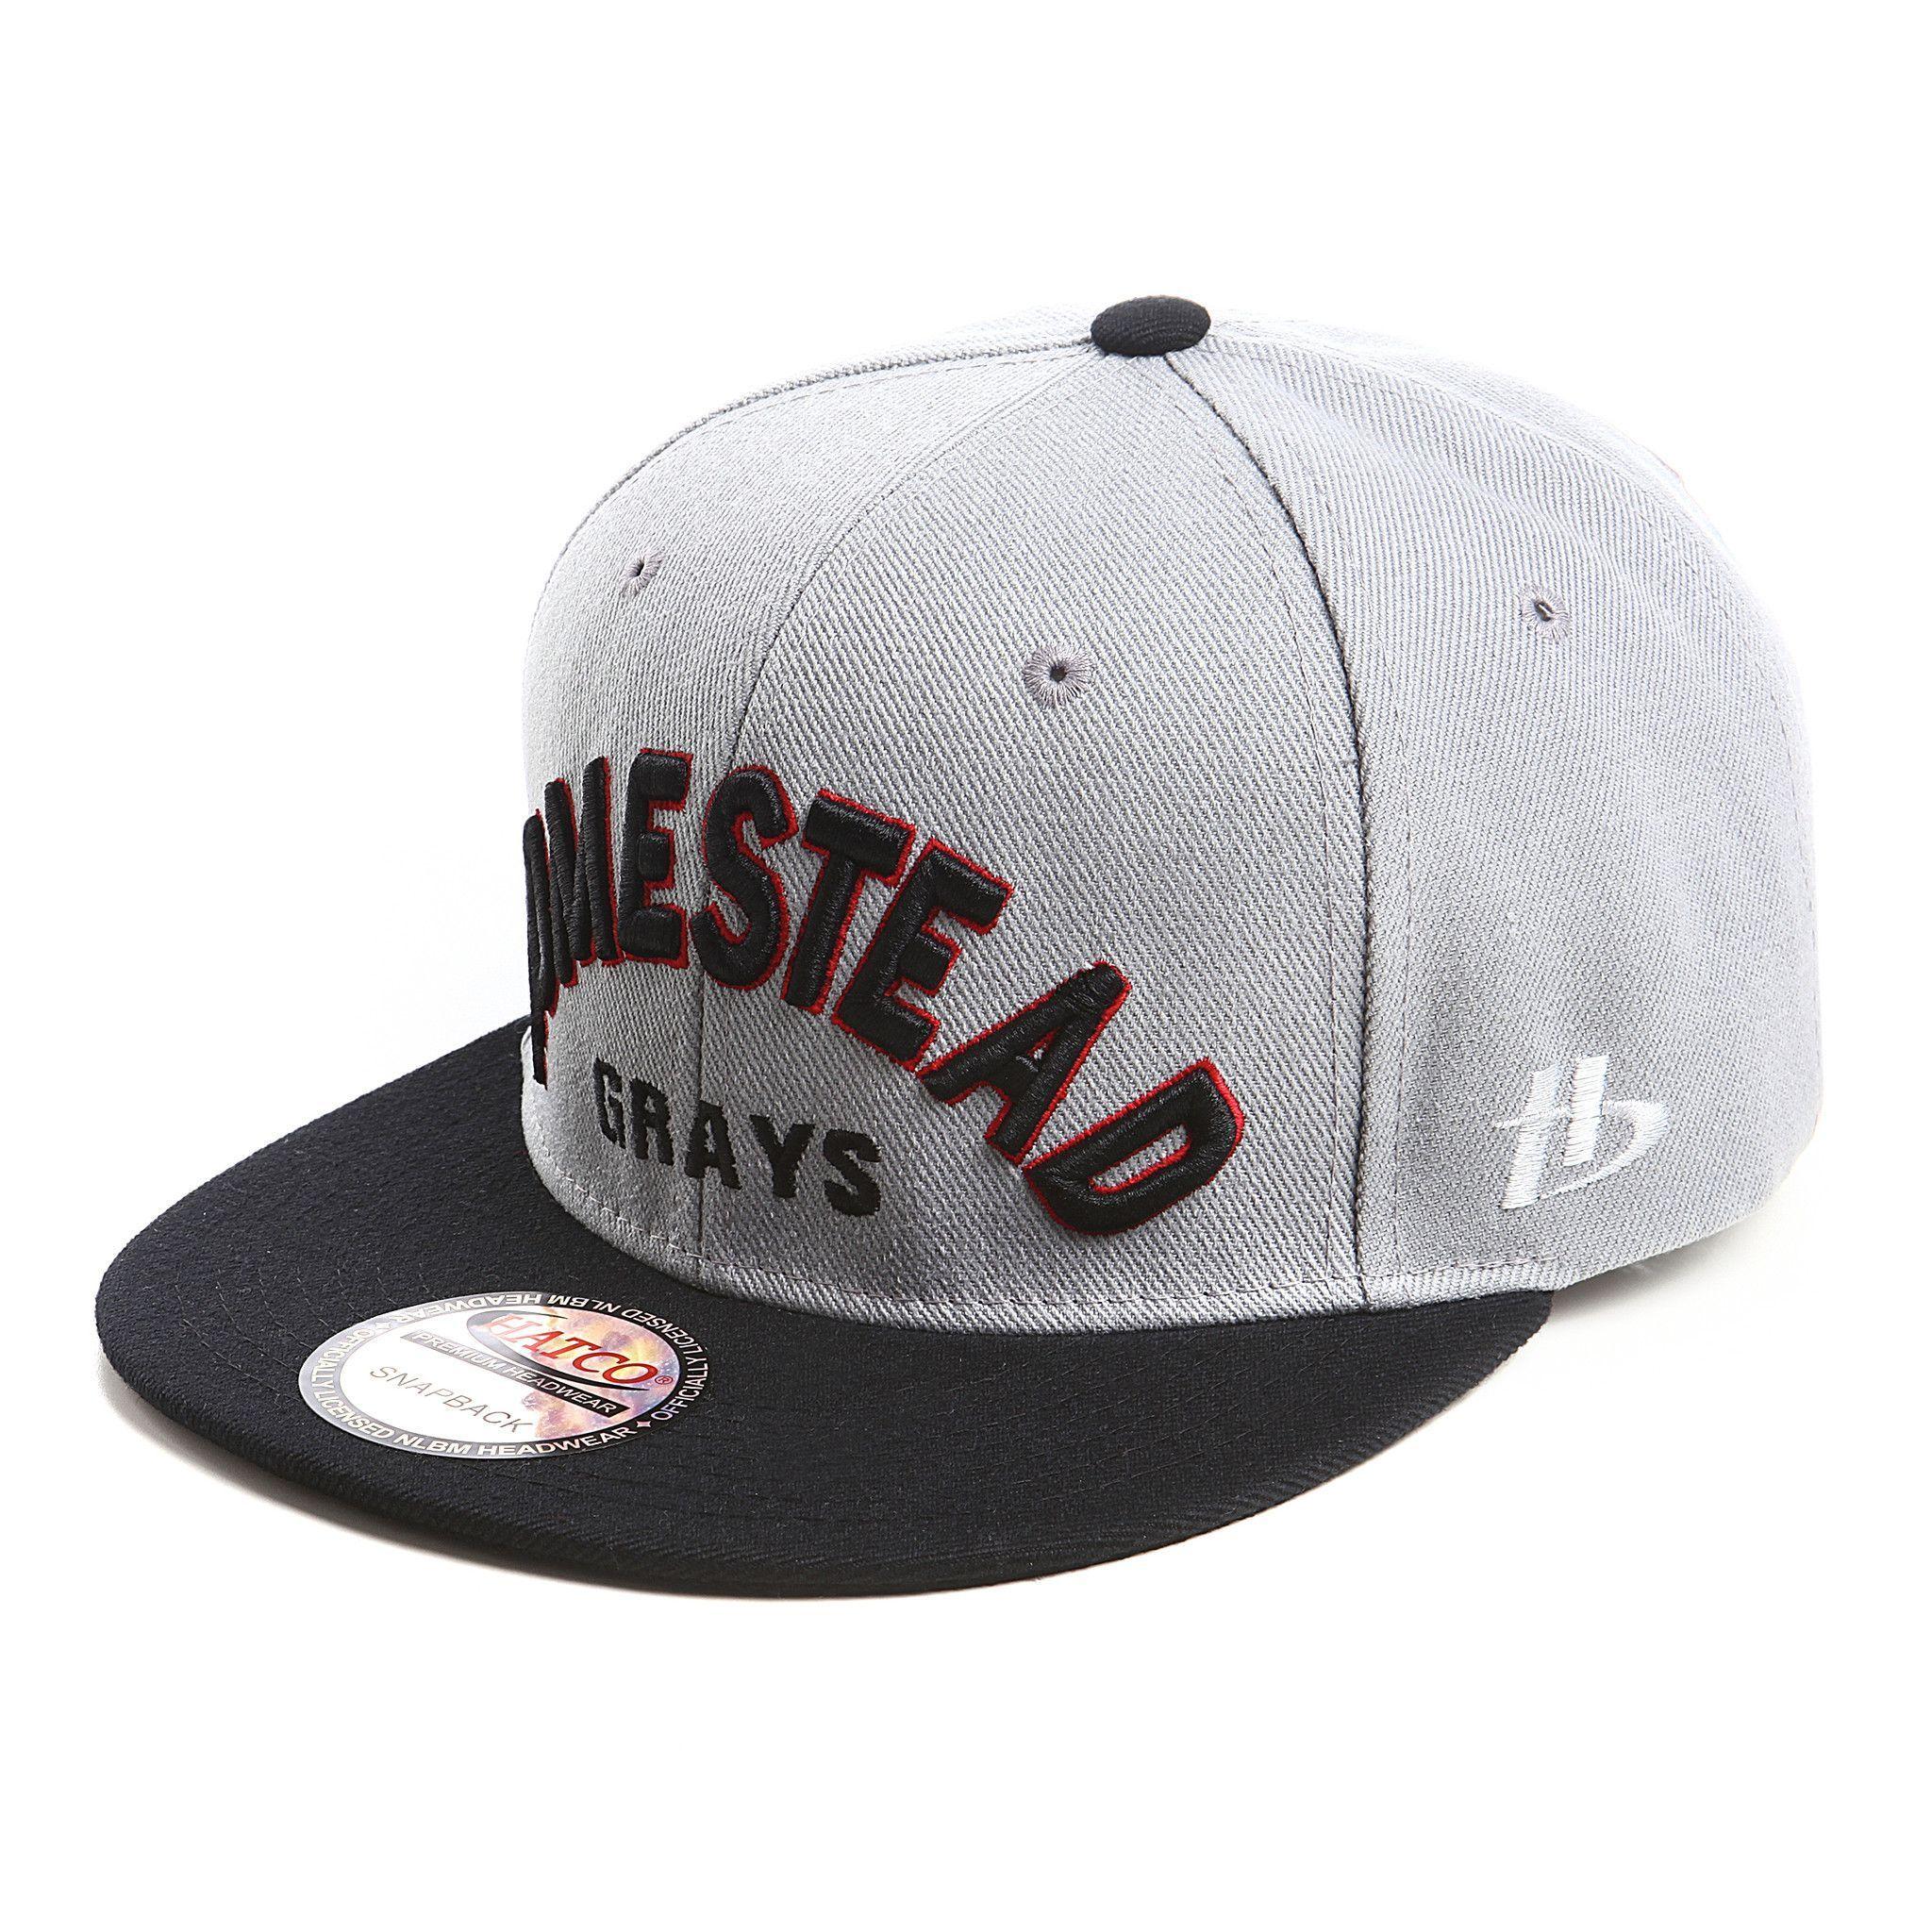 Grays Team Logo - Officially Licensed NLBM Caps. 100% Authentic. Adjustable Snapback ...